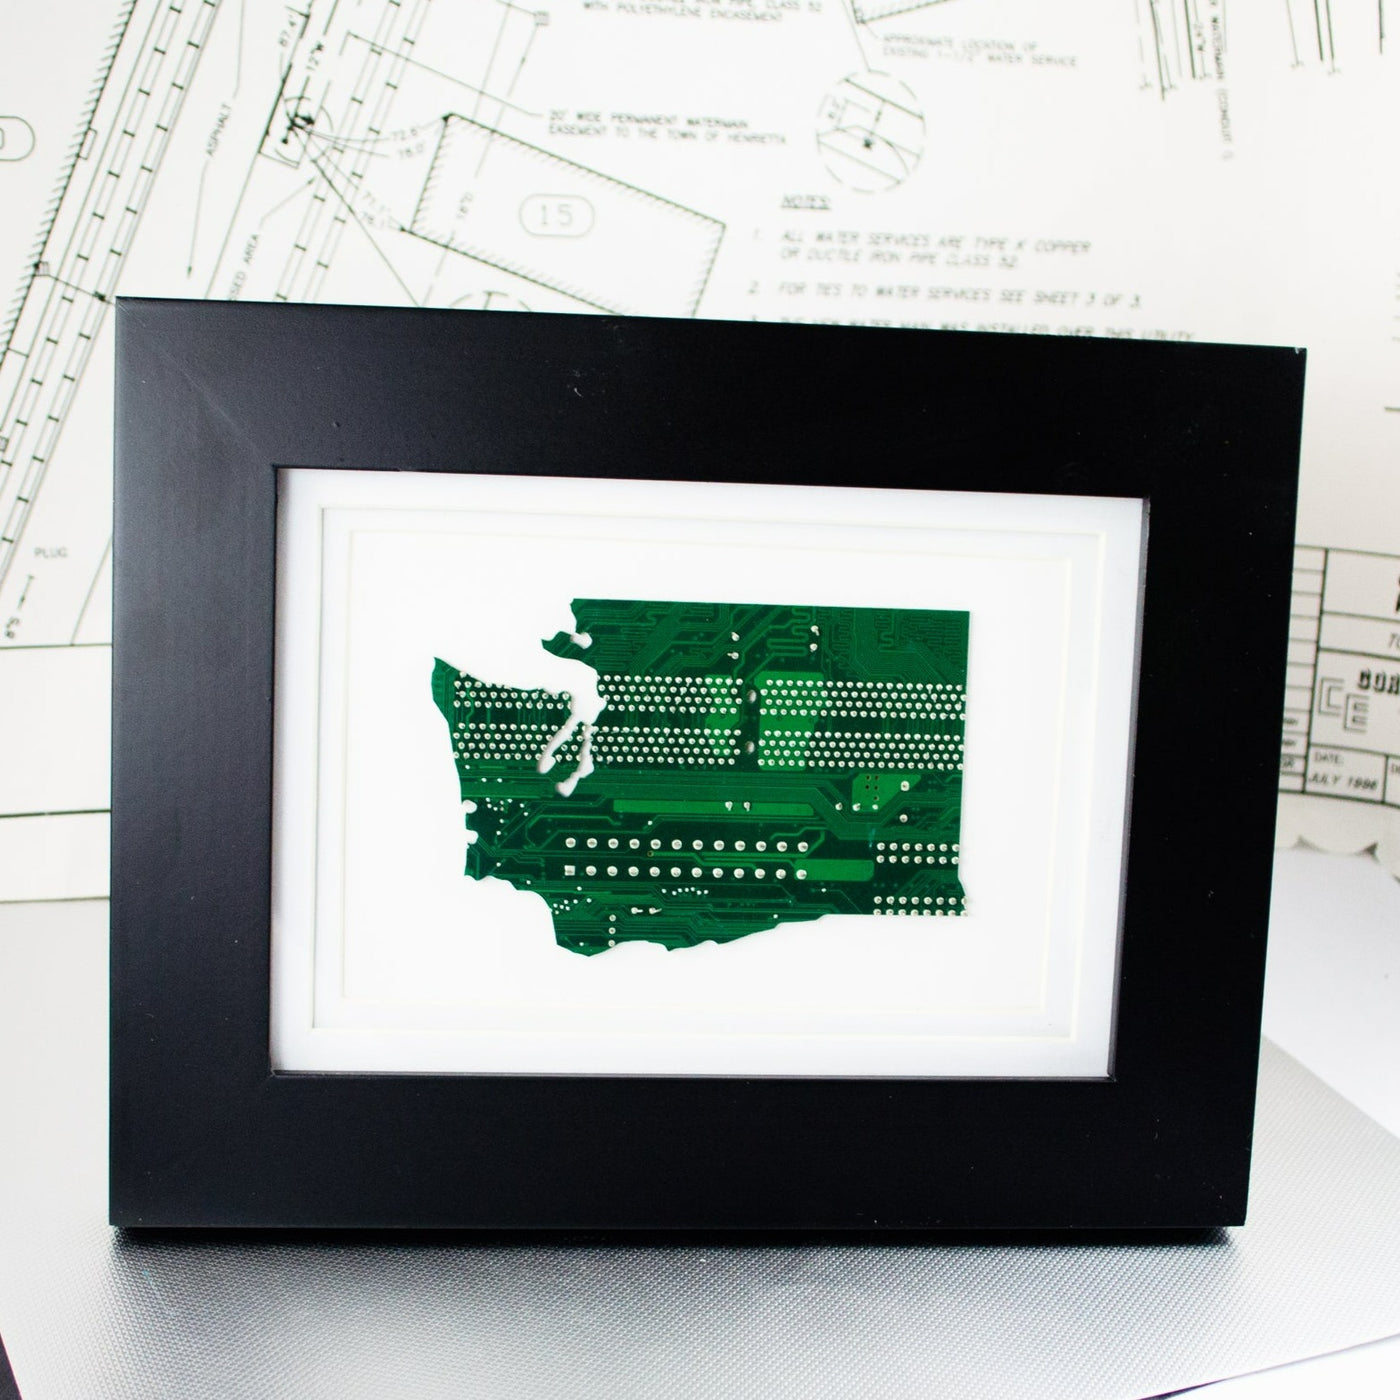 handmade circuit board framed art piece depicting the state of washington